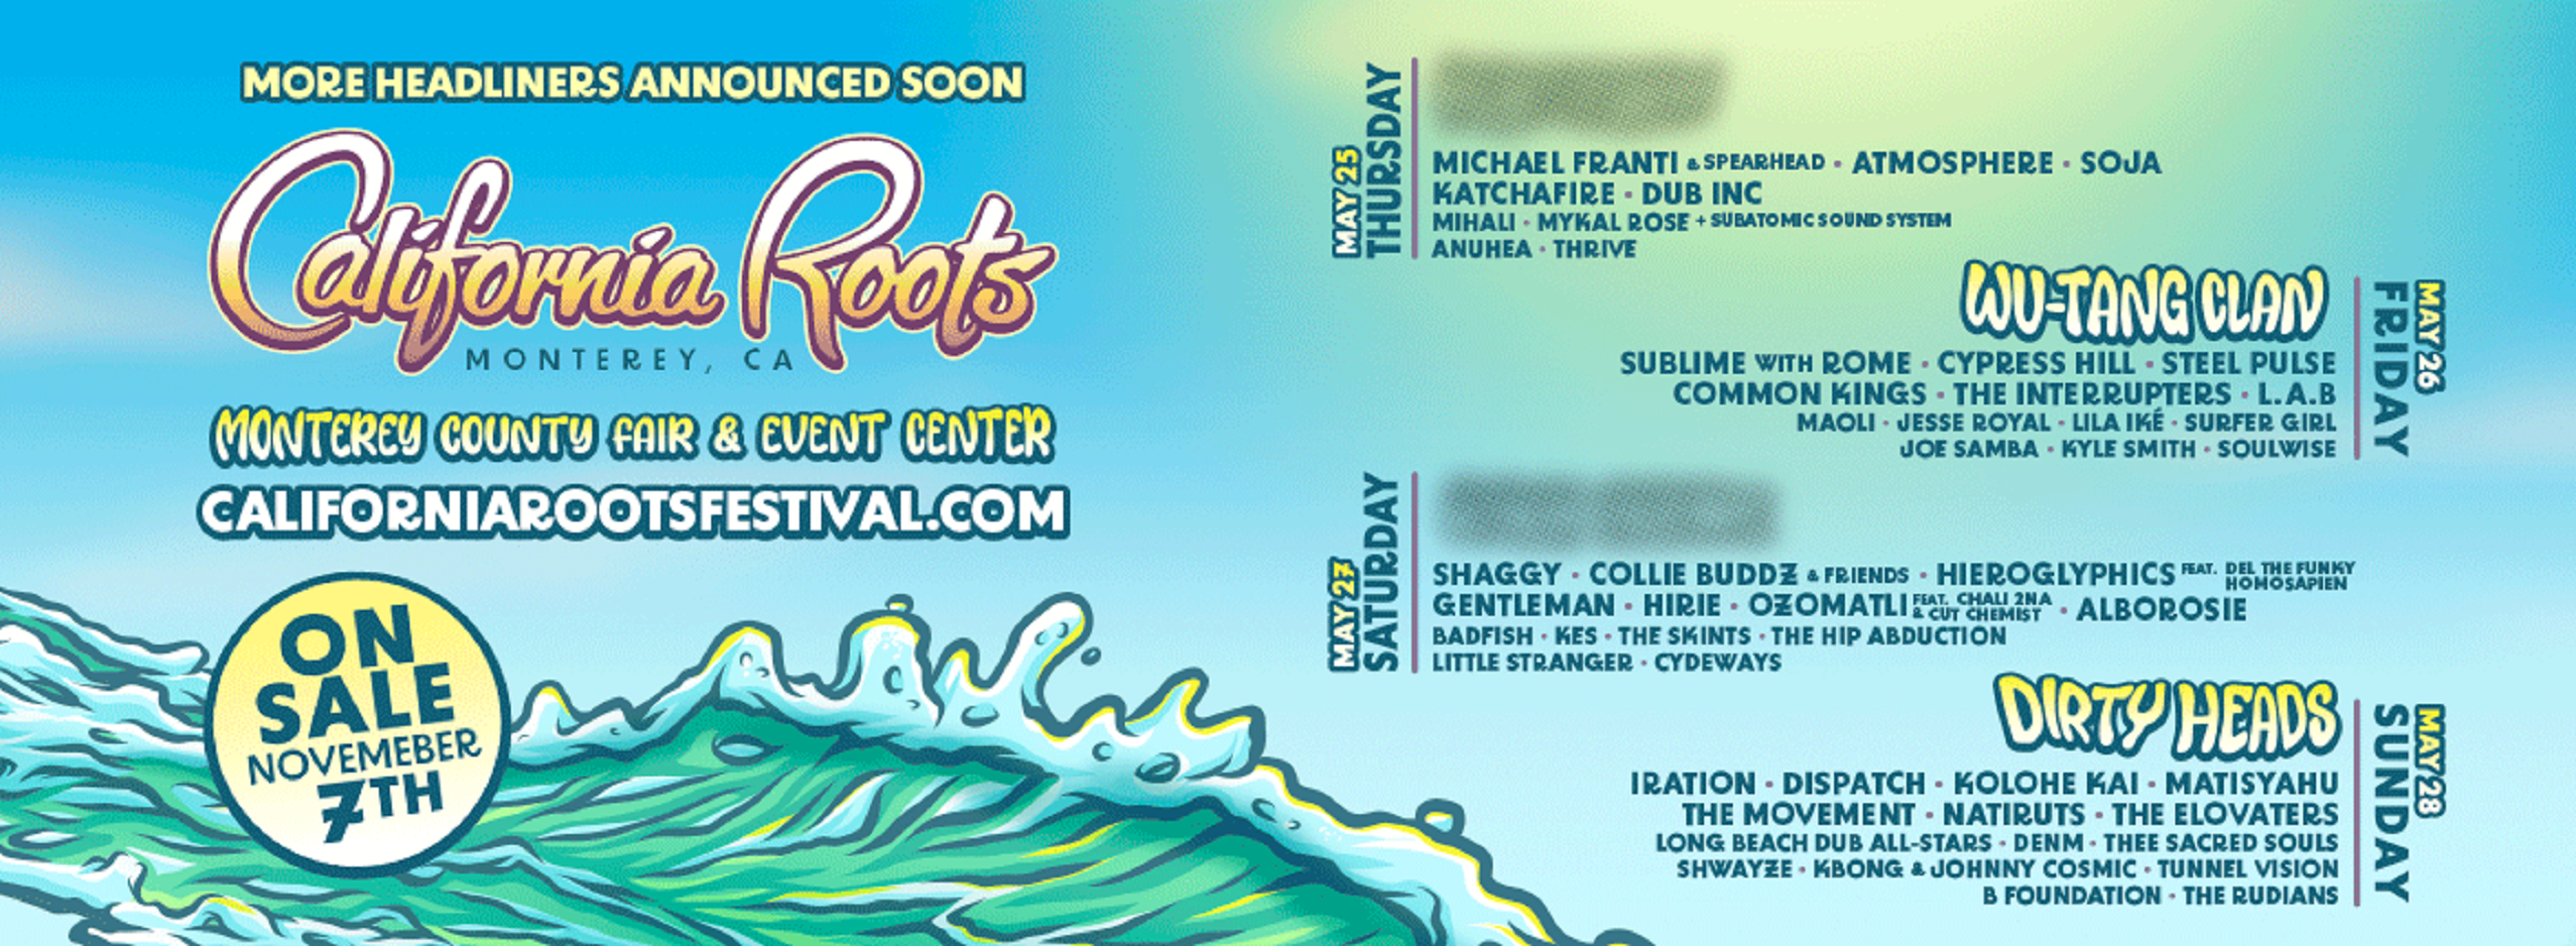 Cali Roots 2023 Line Up Announced featuring Wu-Tang Clan, Dirty Heads, Cypress Hill, Shaggy, Michael Franti & Much More!